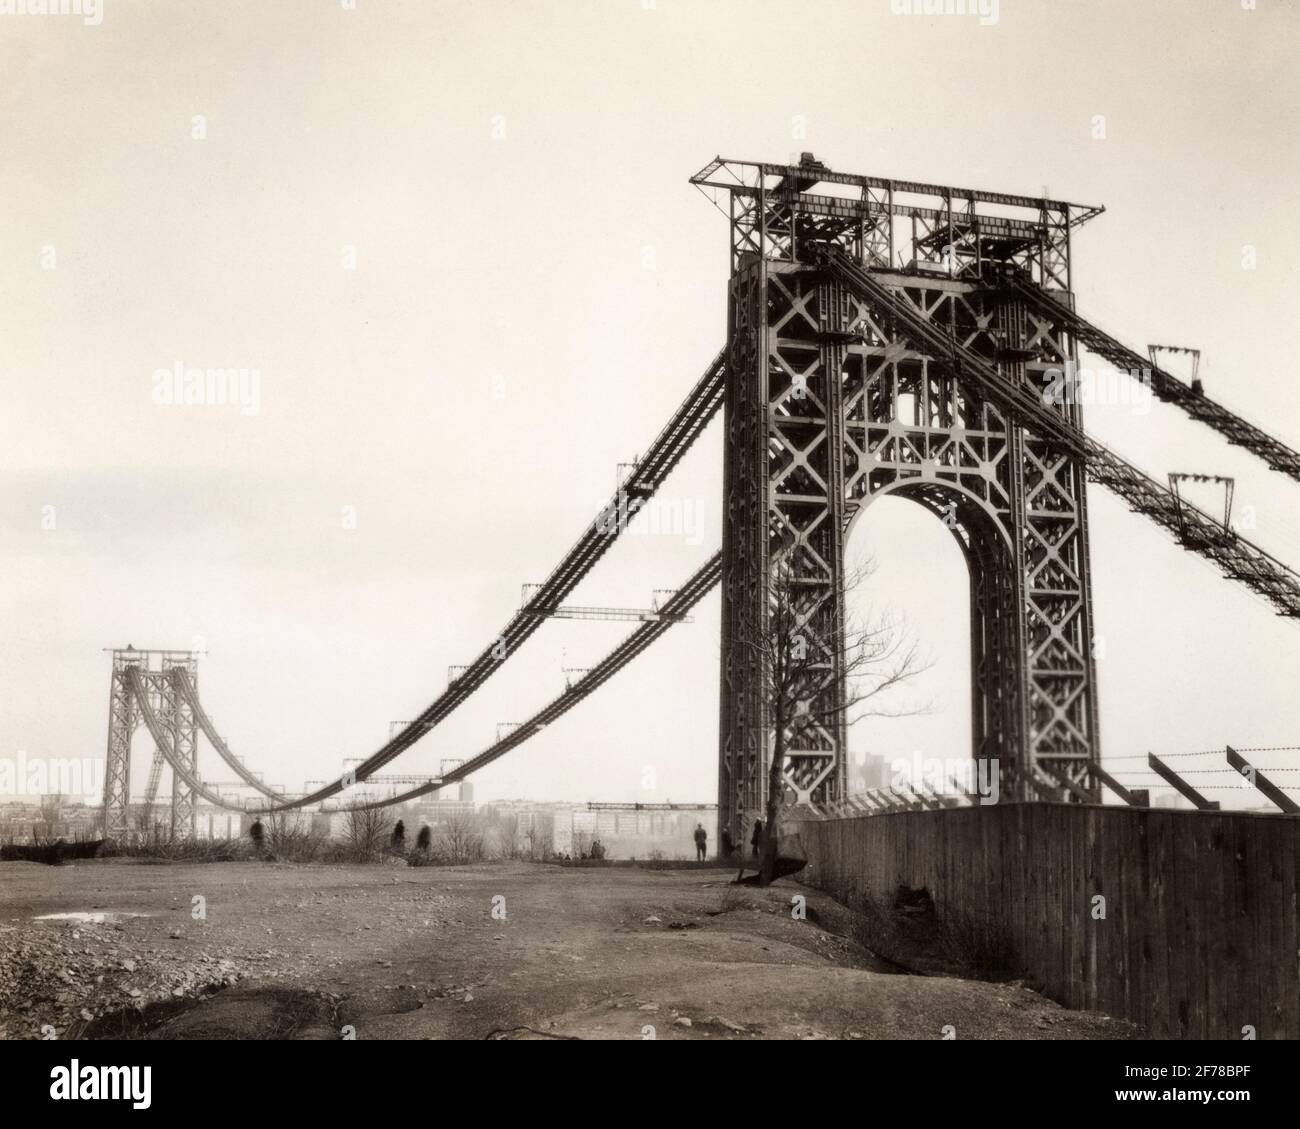 1920s 1930s VIEW OF GEORGE WASHINGTON SUSPENSION BRIDGE WHILE UNDER CONSTRUCTION FROM NJ TO NEW YORK TWO TOWERS BUT NO ROADWAY - q75010 CPC001 HARS VISION DREAMS STRUCTURE STRENGTH EXTERIOR NJ NYC CONNECTION CONCEPTUAL NEW YORK ROADWAY CITIES IMAGINATION NEW JERSEY NEW YORK CITY CREATIVITY PRECISION SOLUTIONS SPAN BLACK AND WHITE BRIDGES HUDSON RIVER JOIN OLD FASHIONED SUSPENSION TOWERS Stock Photo